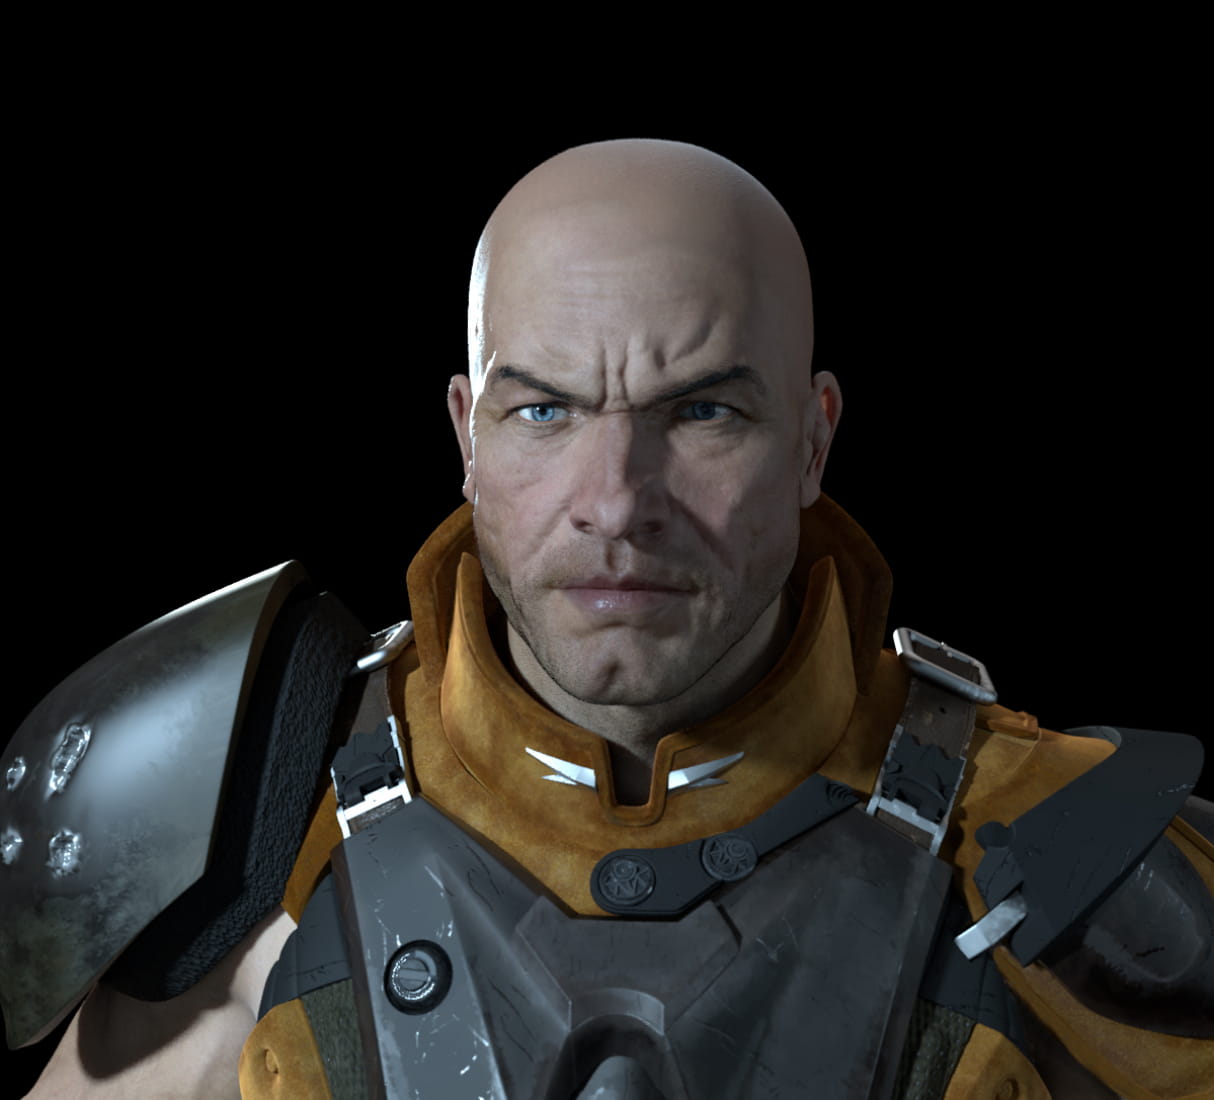 sarge-from-quake-3-arena